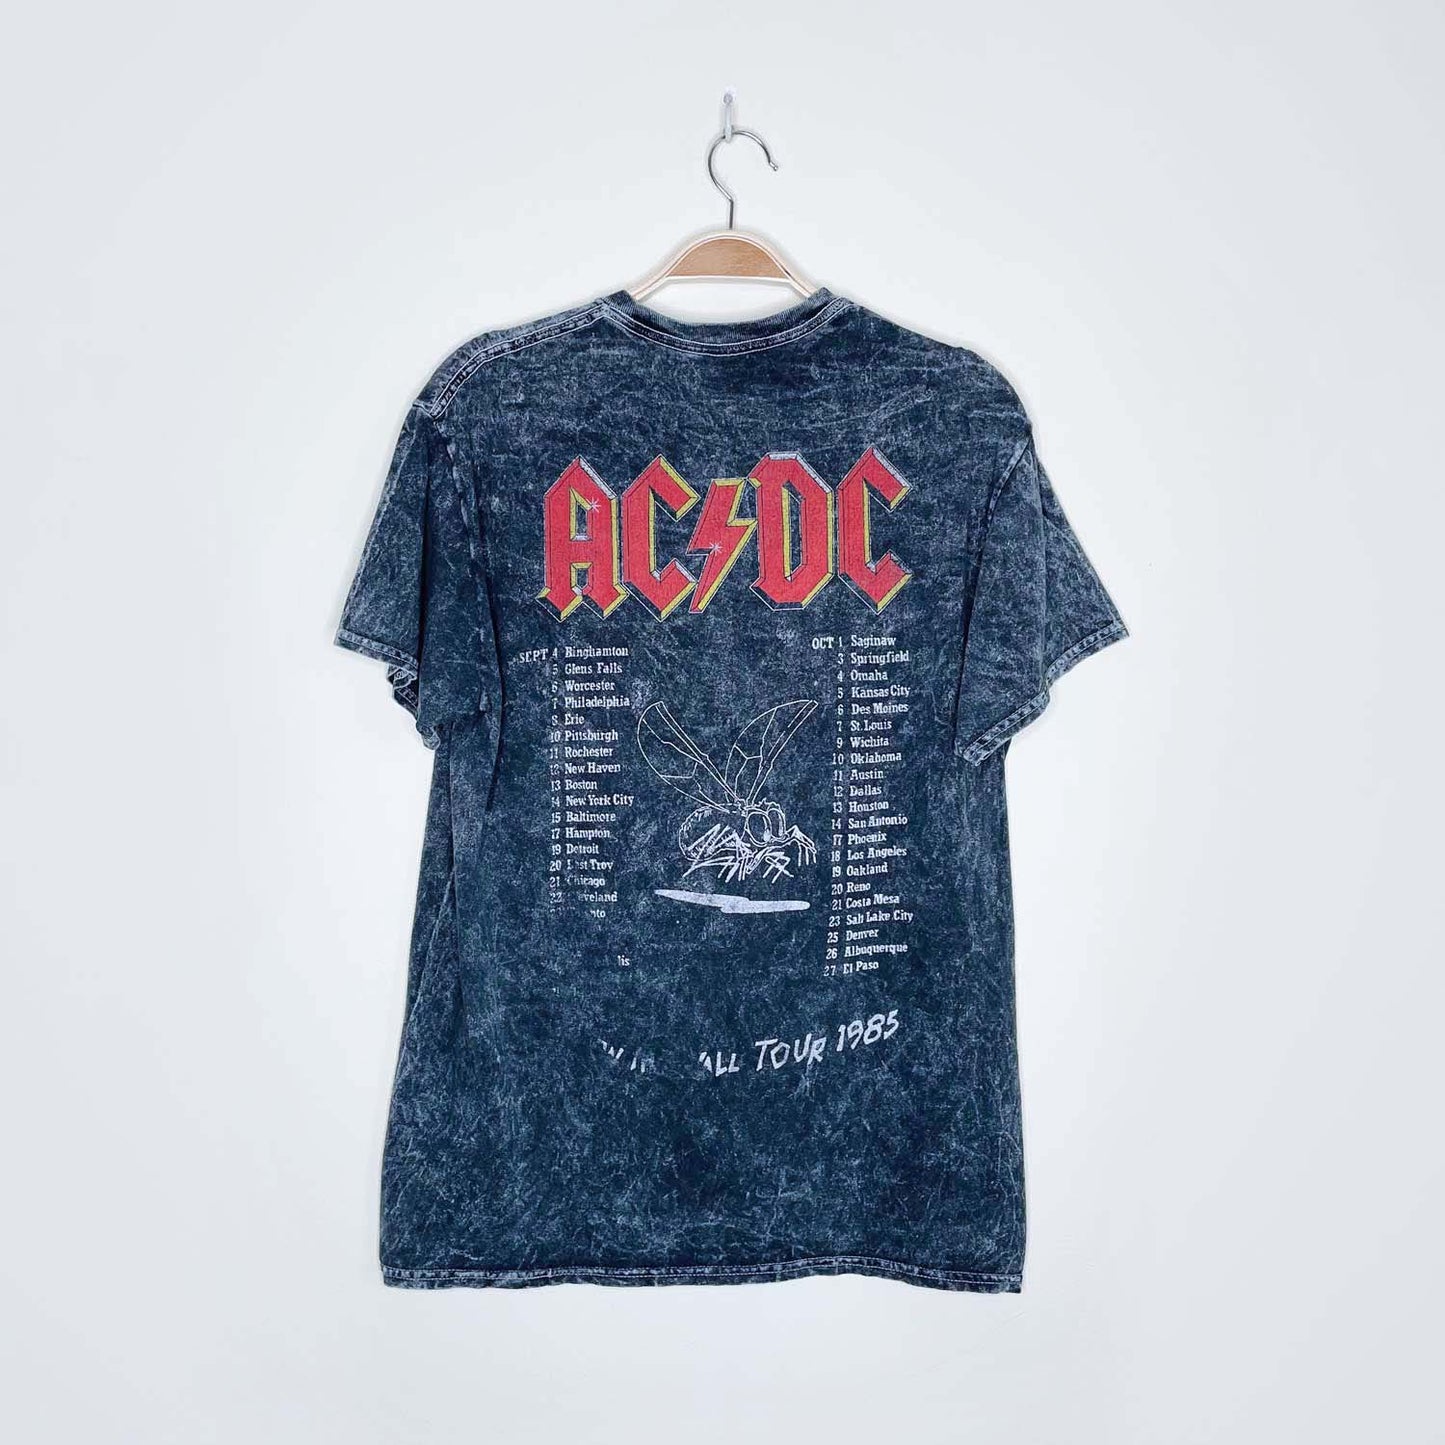 acdc 2015 fly on the wall tour '85 - size small